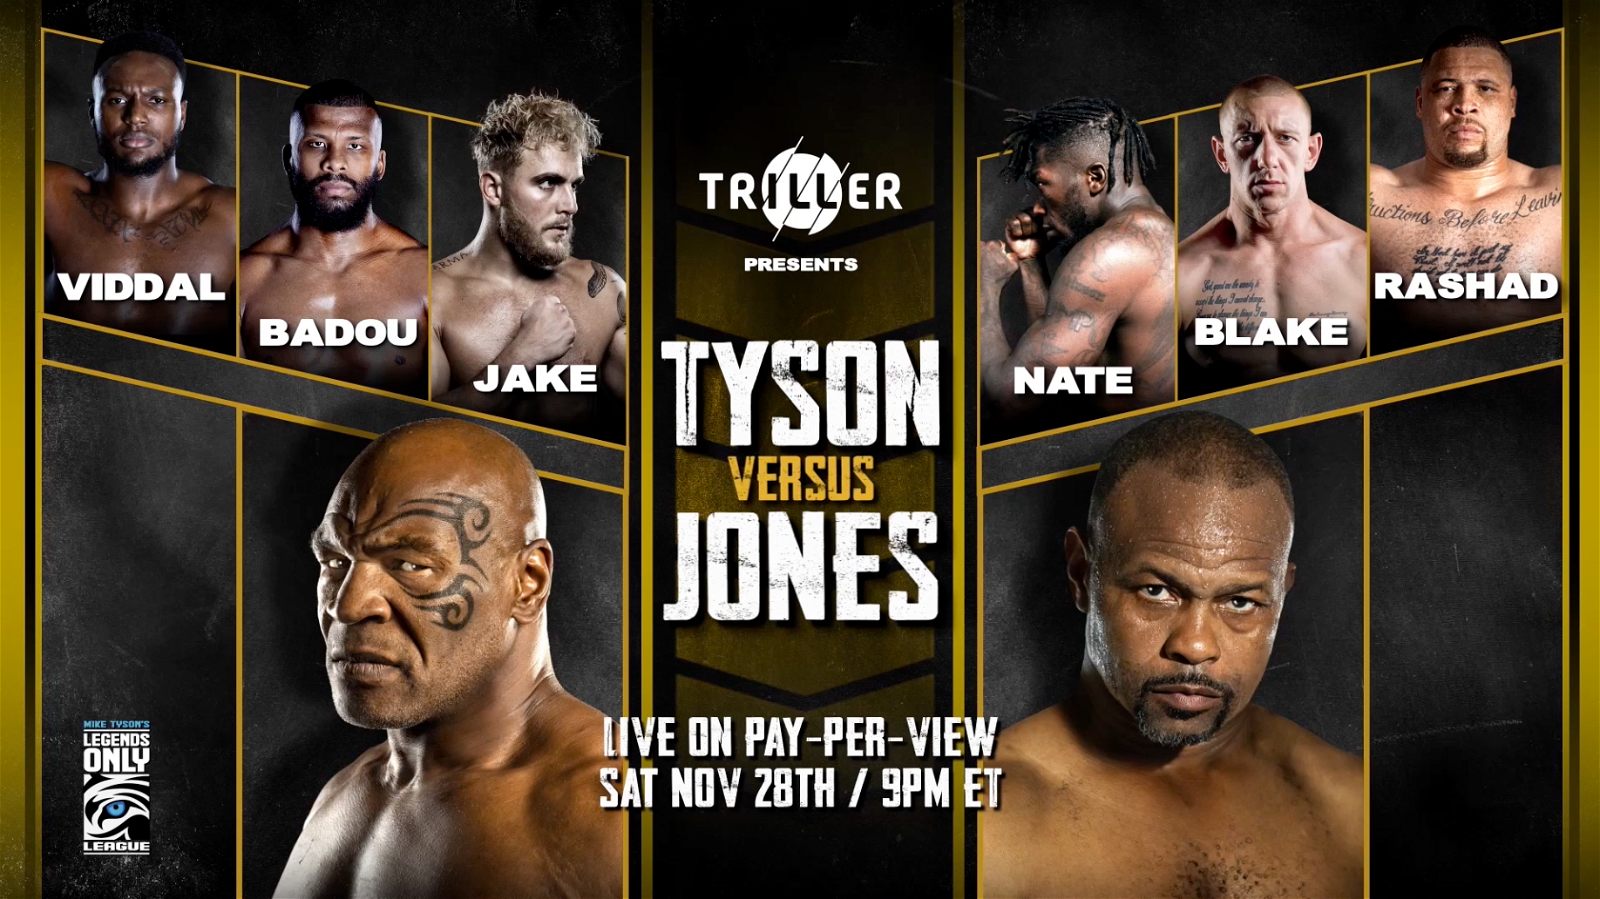 Mike Tyson vs Roy Jones Jr What Time is the Match - Date, Time, Start time